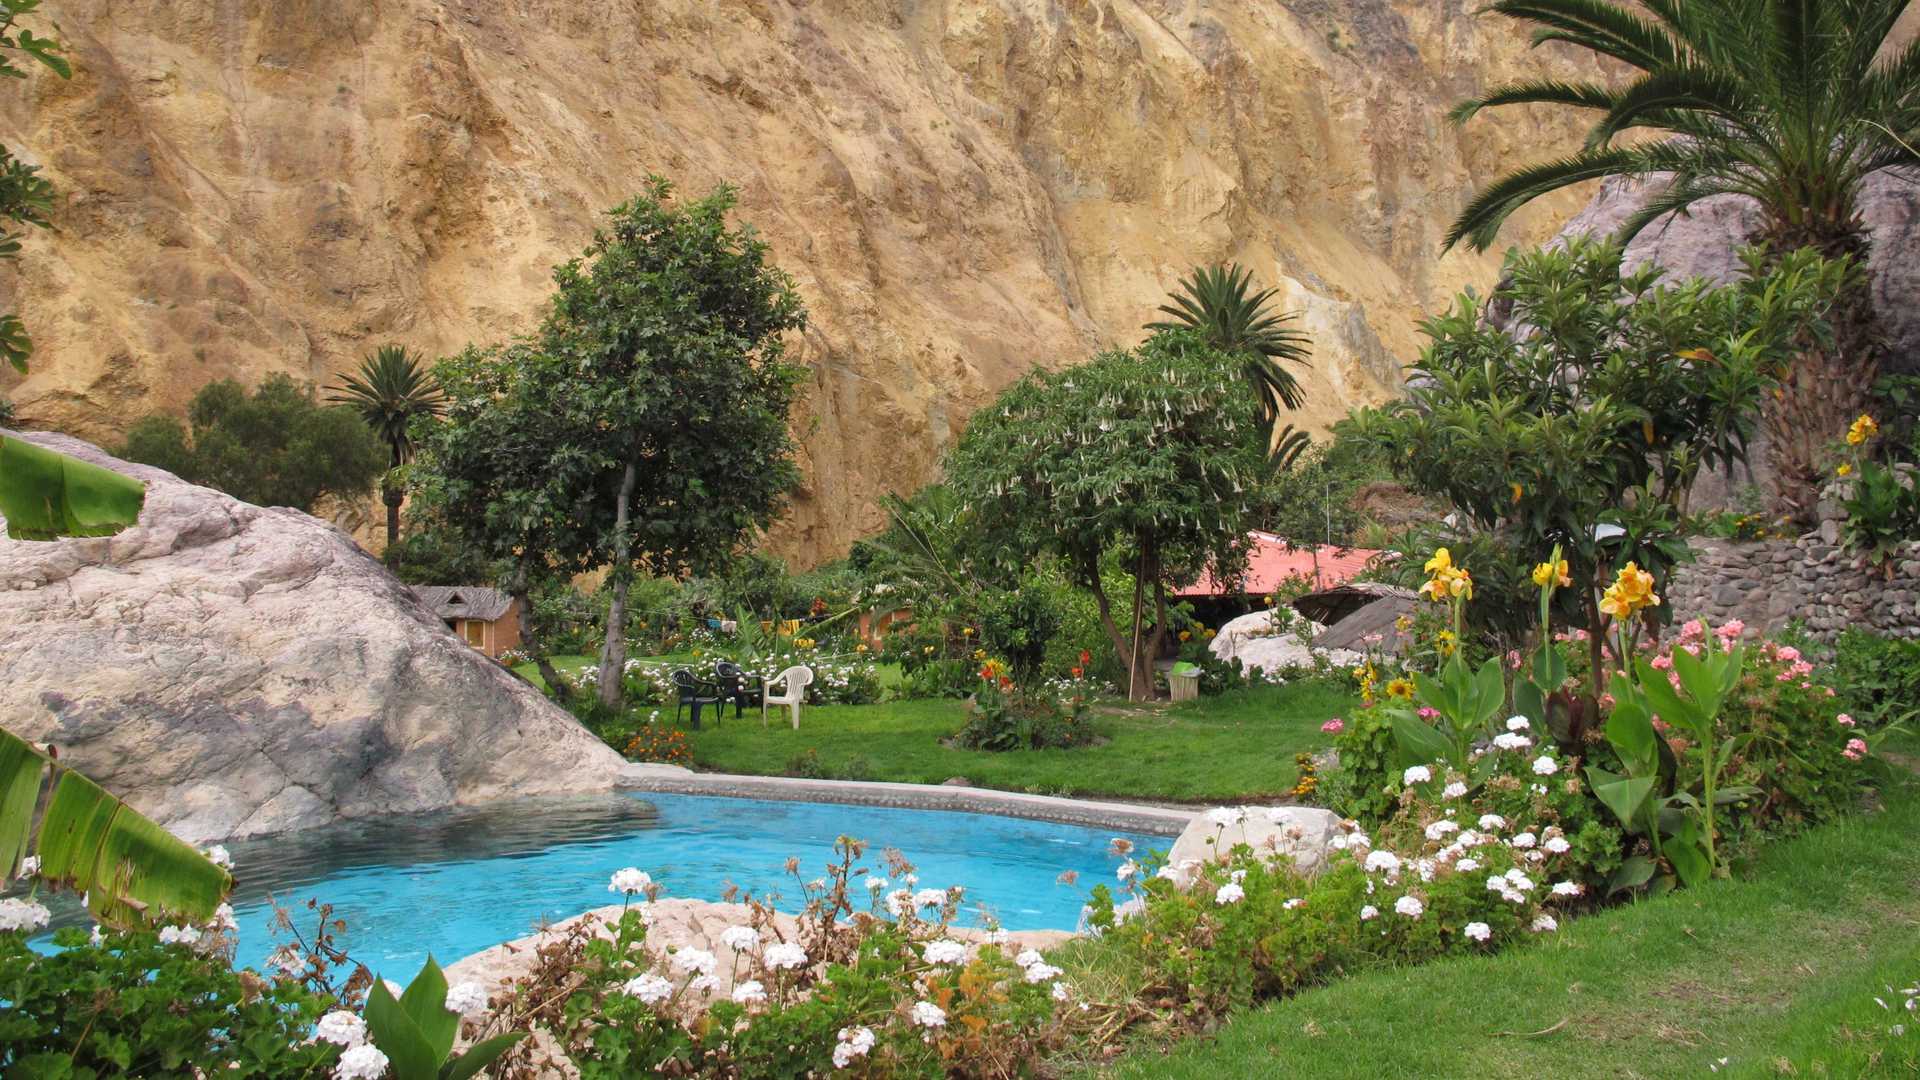 The hot springs you'll visit after the Colca Canyon Trek